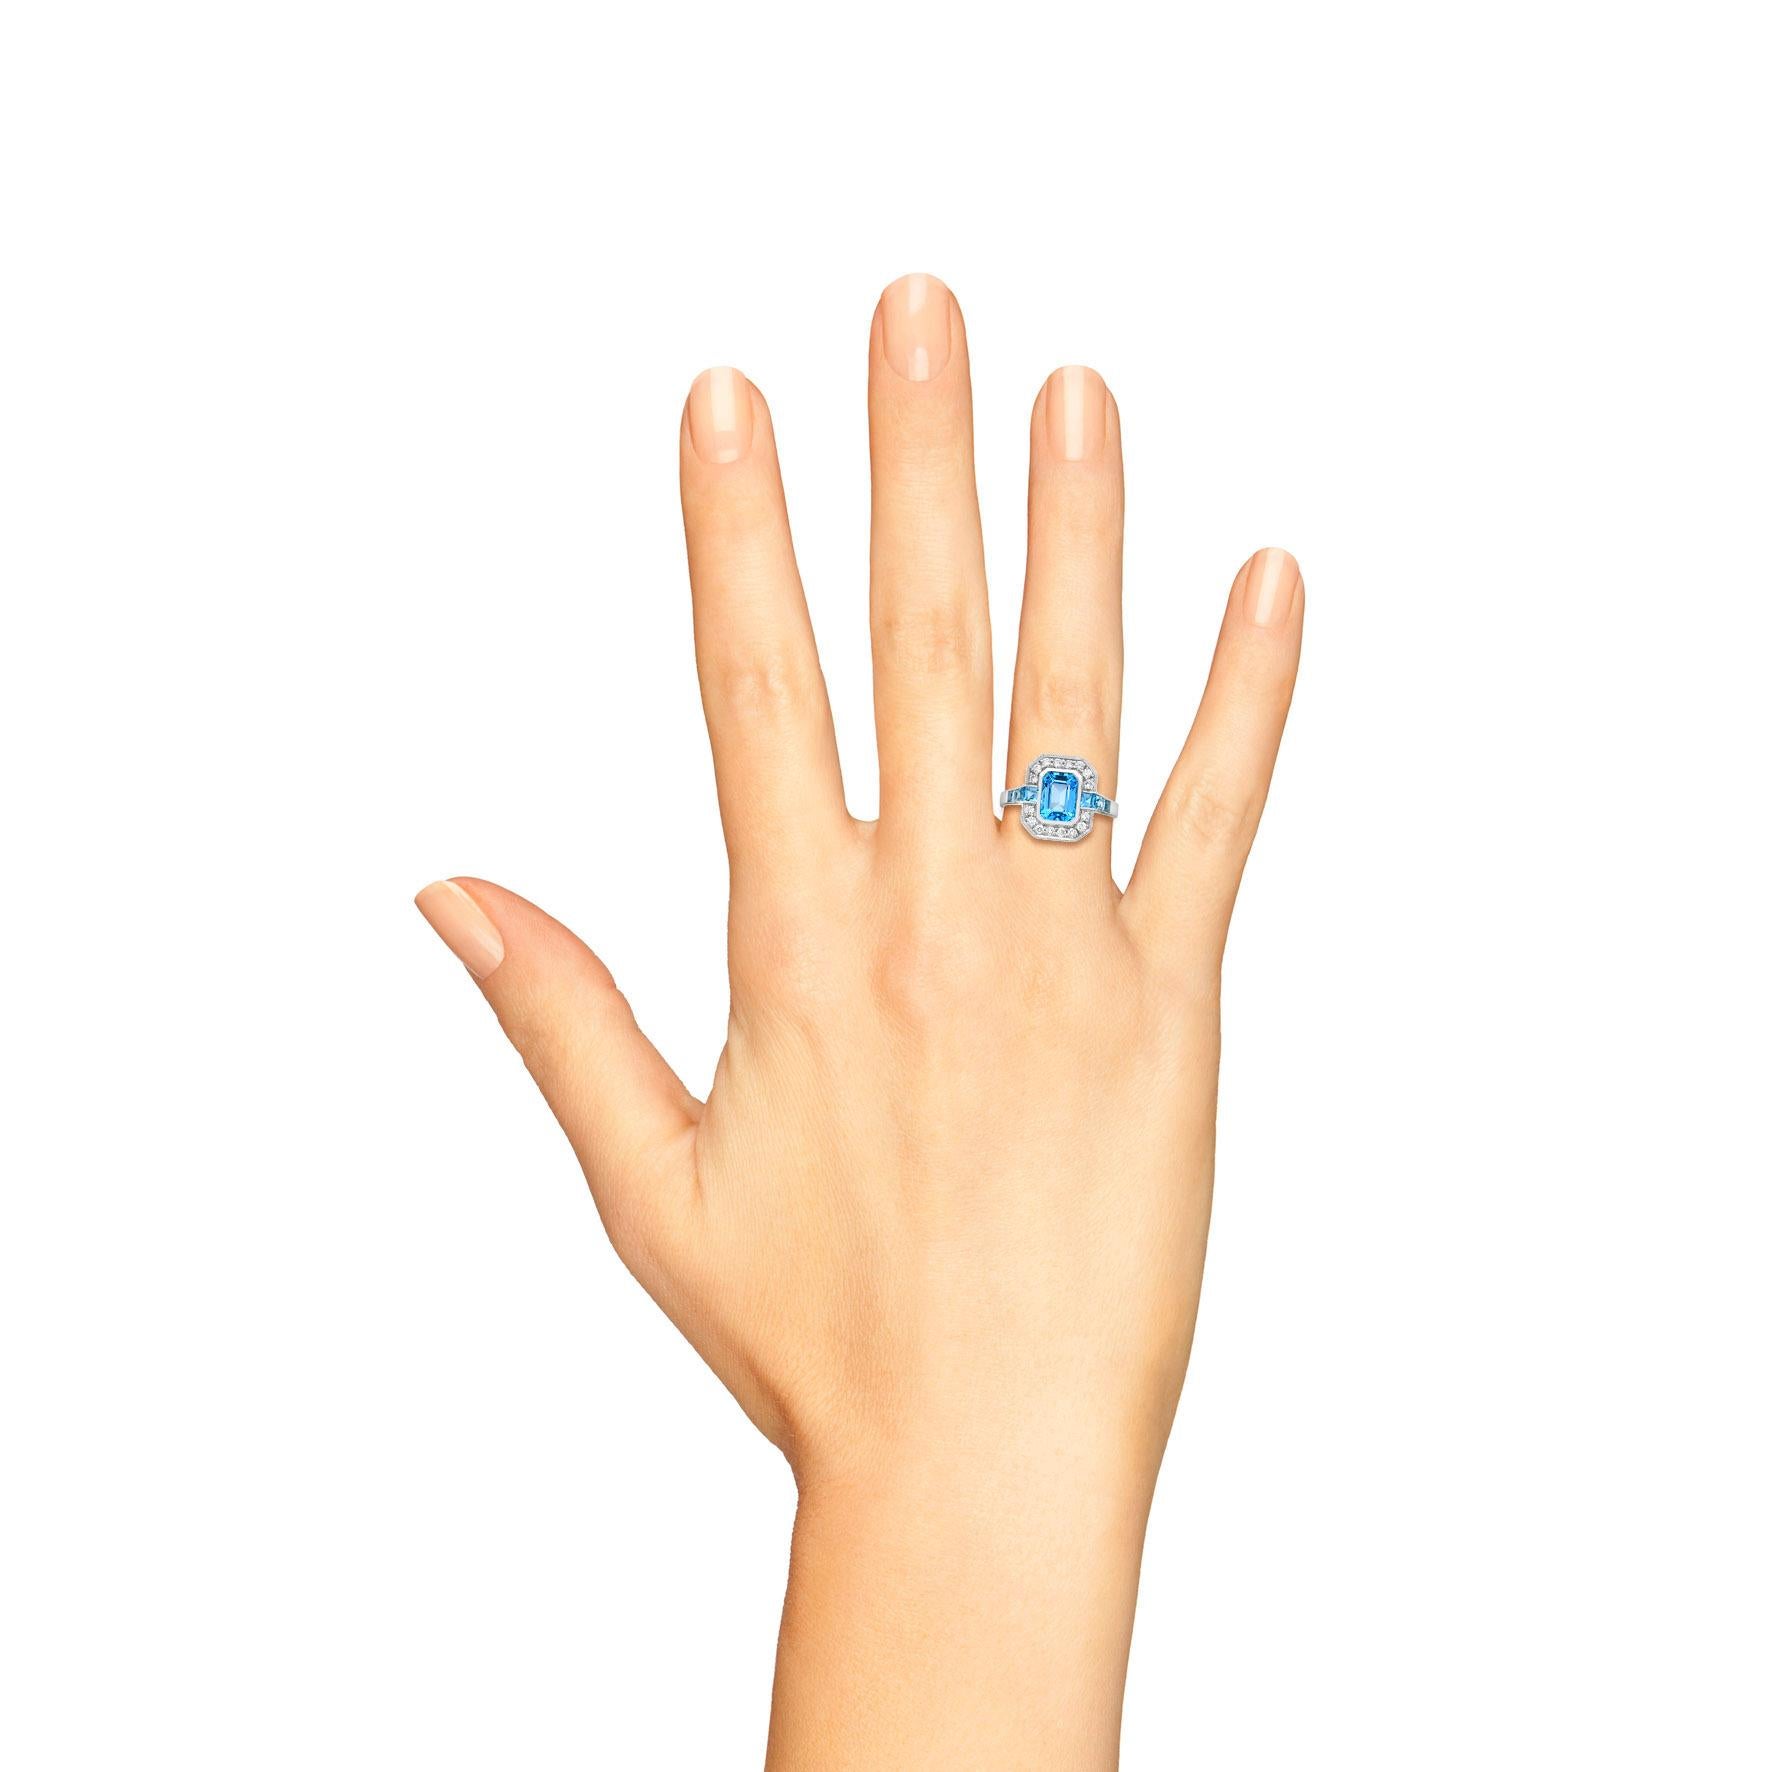 A gorgeous emerald-cut blue topaz is presented in classic Art Deco style. The glorious gemstone radiates from within a sparkling halo of bright white round brilliant cut diamonds, leading to a slightly flared French cut Swiss blue topaz on the